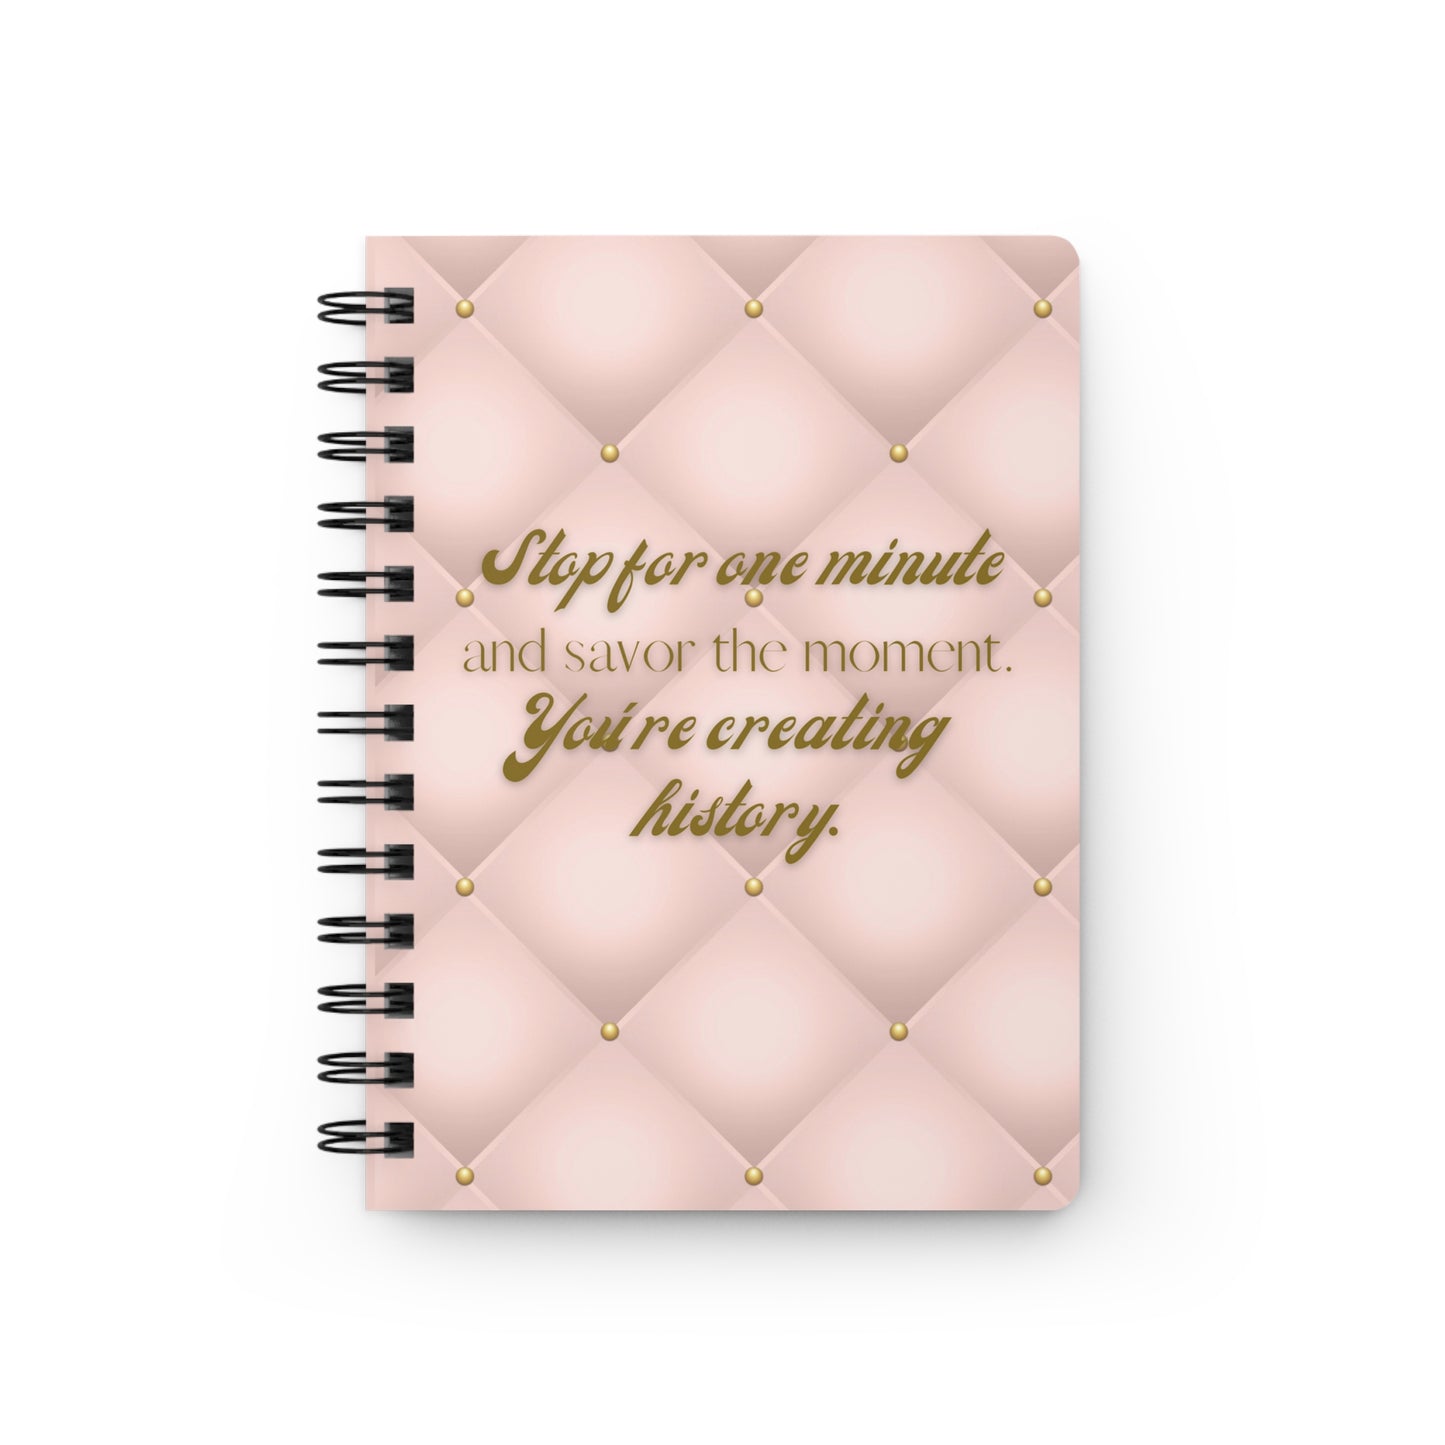 Stop for one minute Tufted Print Light Grayish Red and Gold Spiral Bound Journal